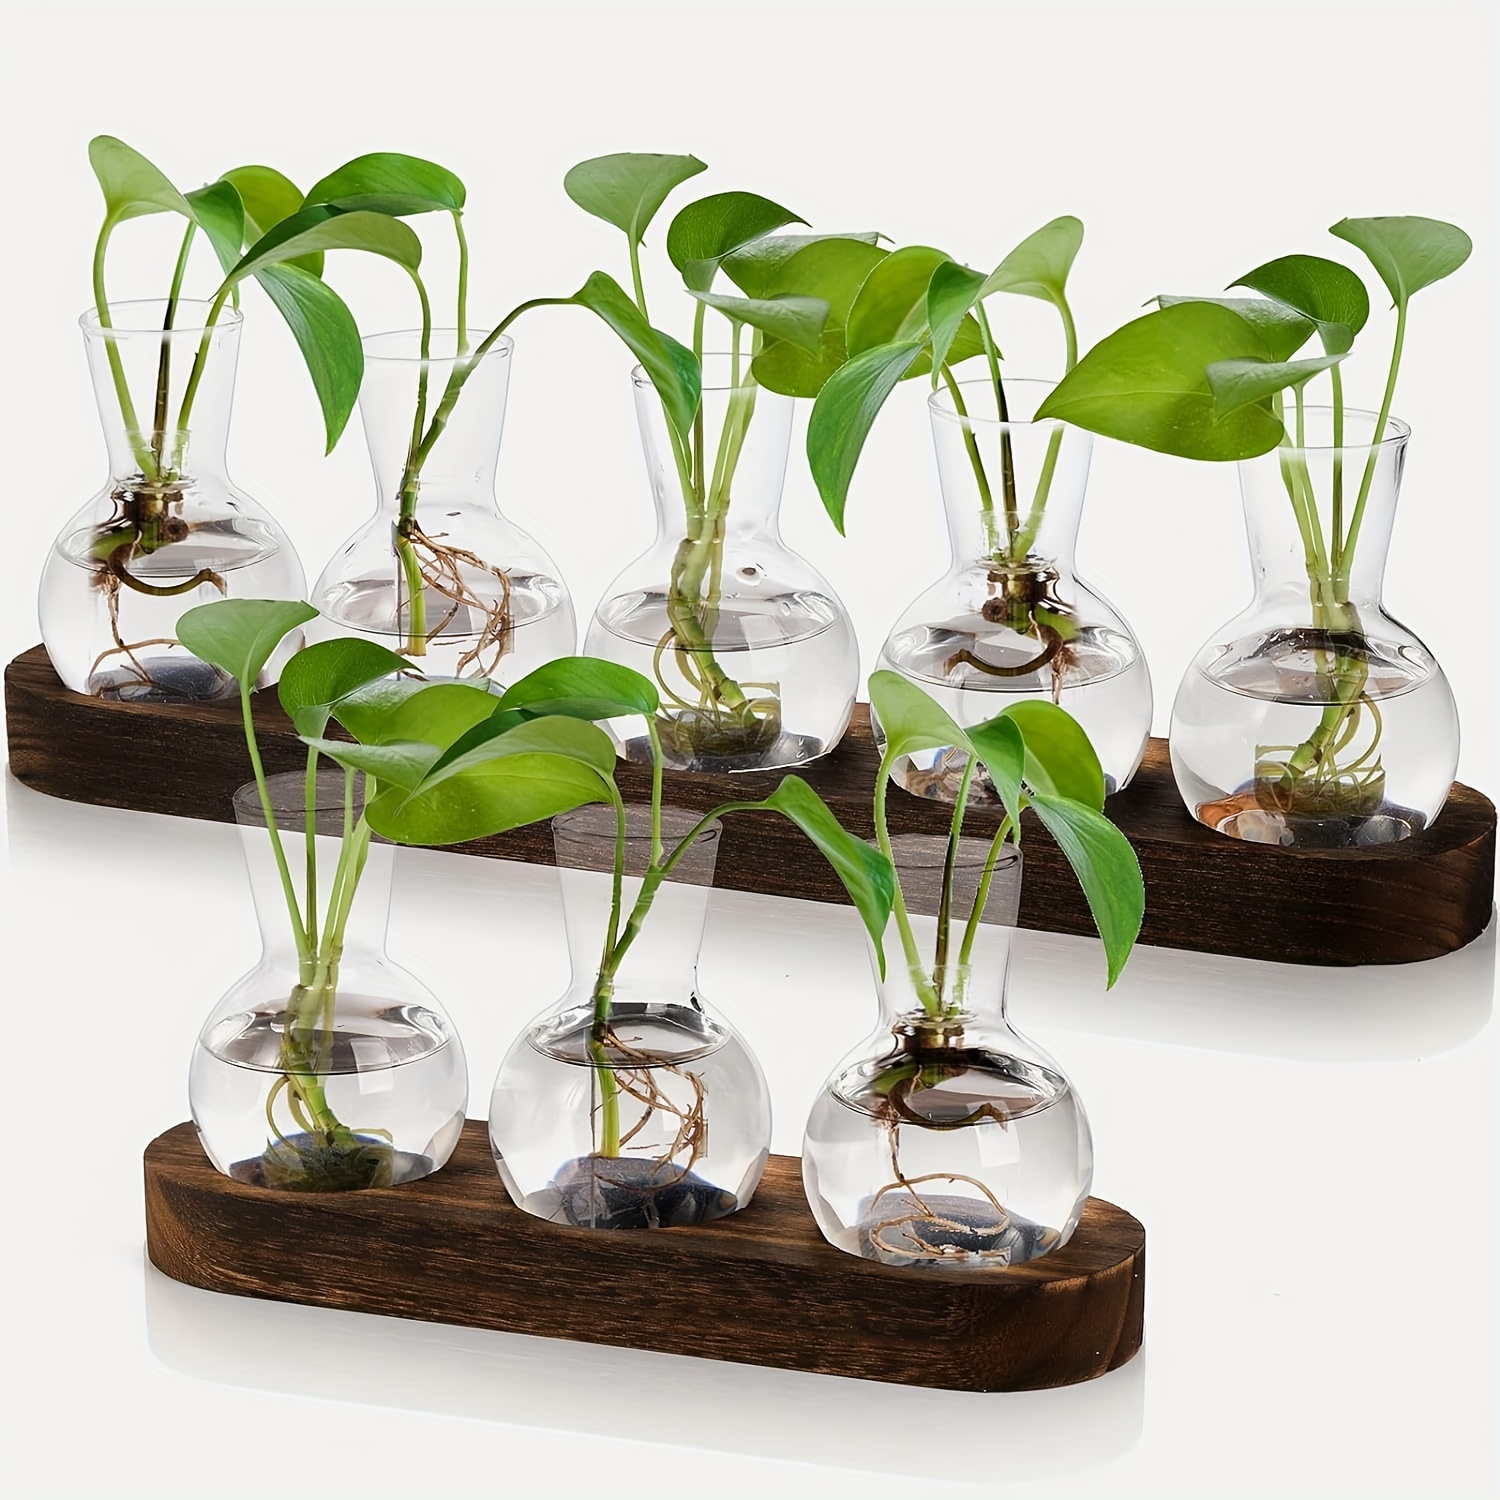 

3/5 Bulbs Set Plant Propagation Station, Plant Terrarium With Wooden Tray, Tabletop Bulb Glass Vase Planter For Home Office Decor